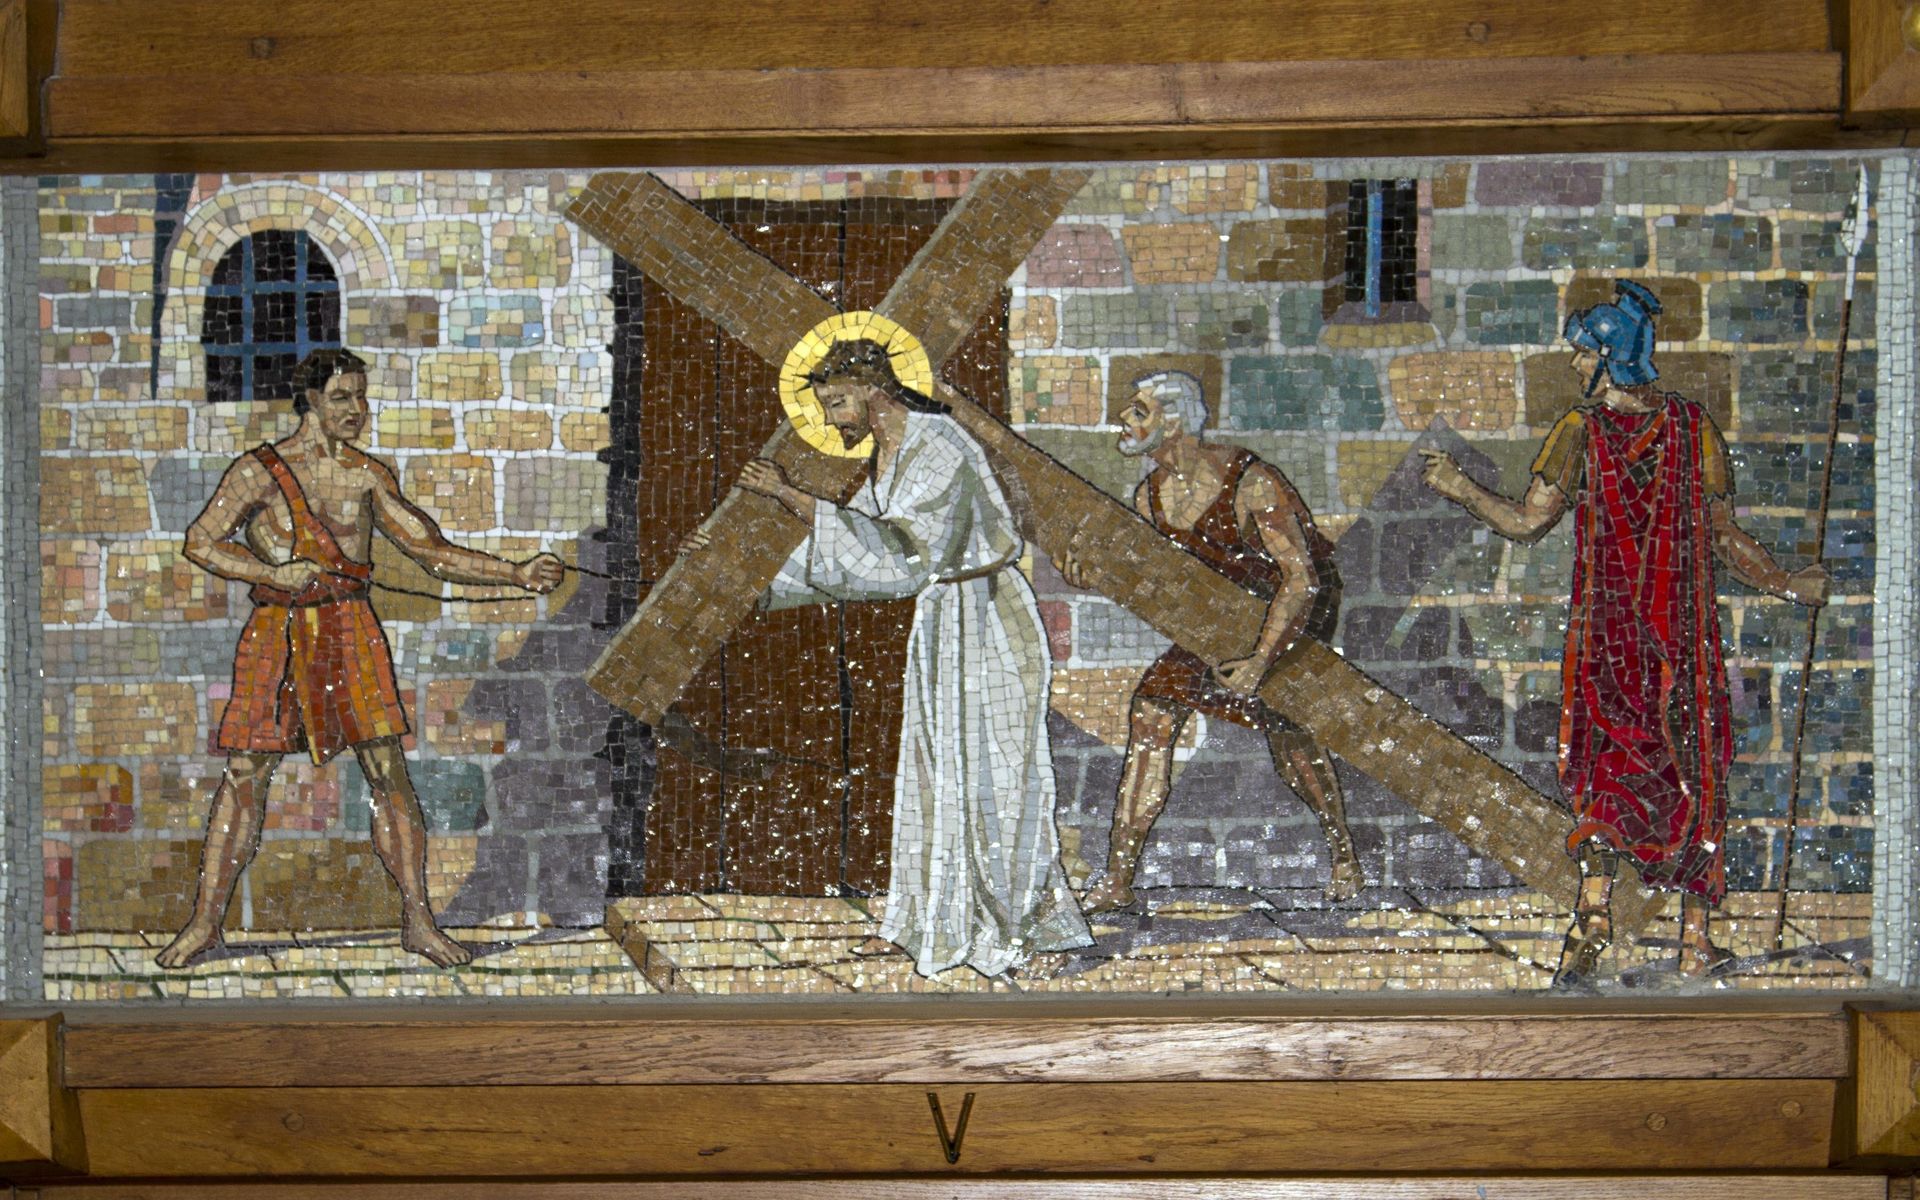 A mosaic painting of jesus carrying a cross.